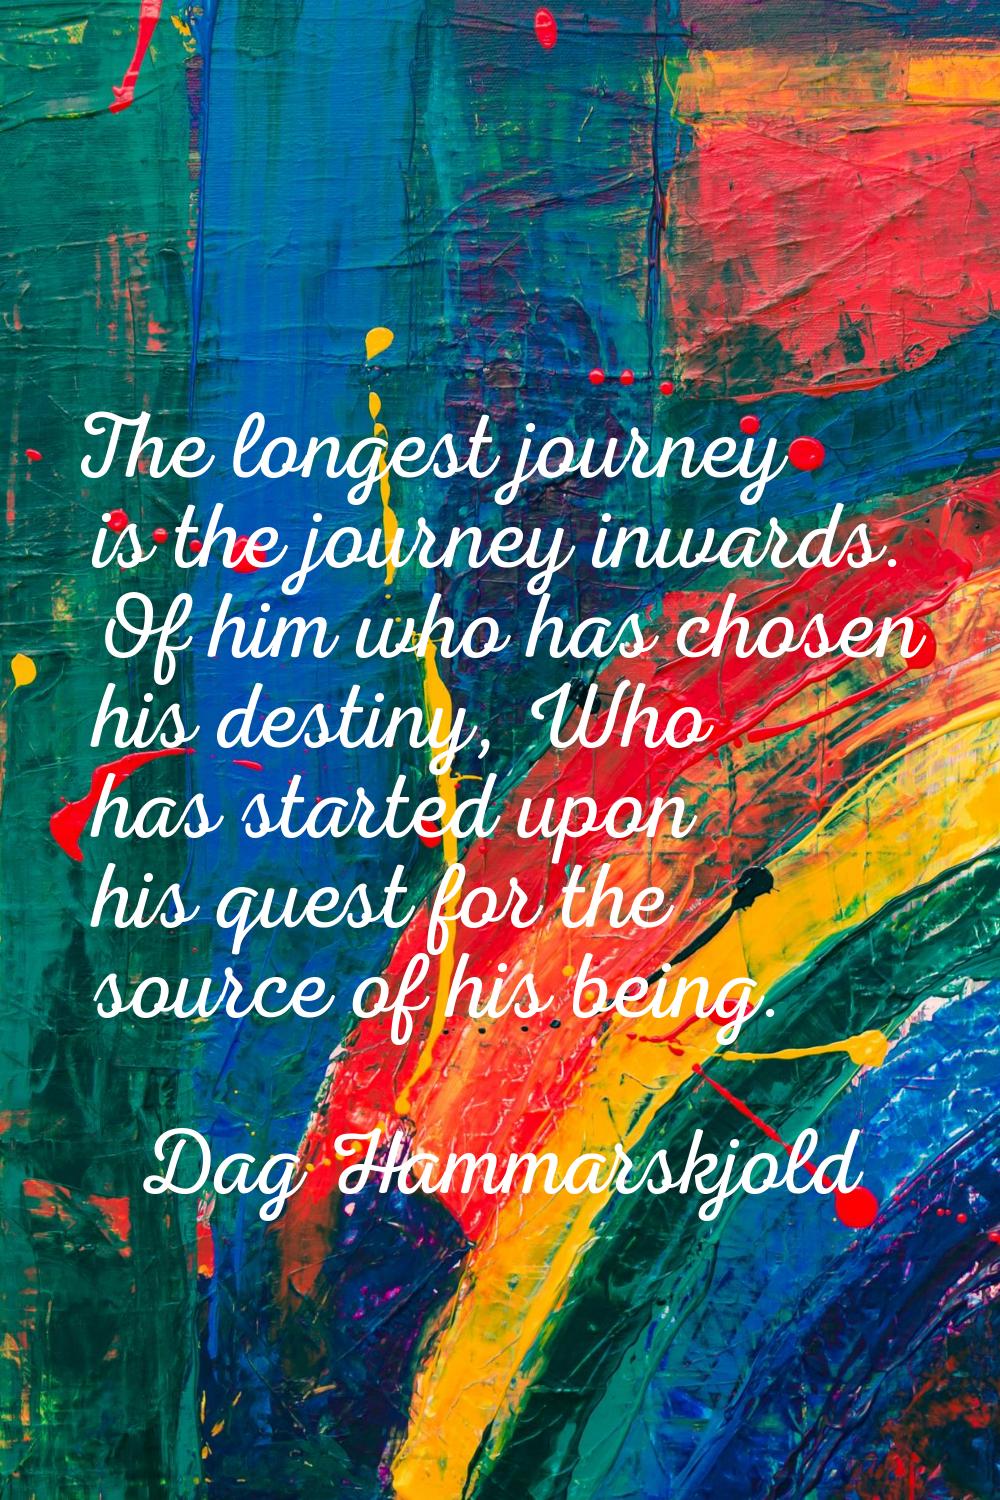 The longest journey is the journey inwards. Of him who has chosen his destiny, Who has started upon